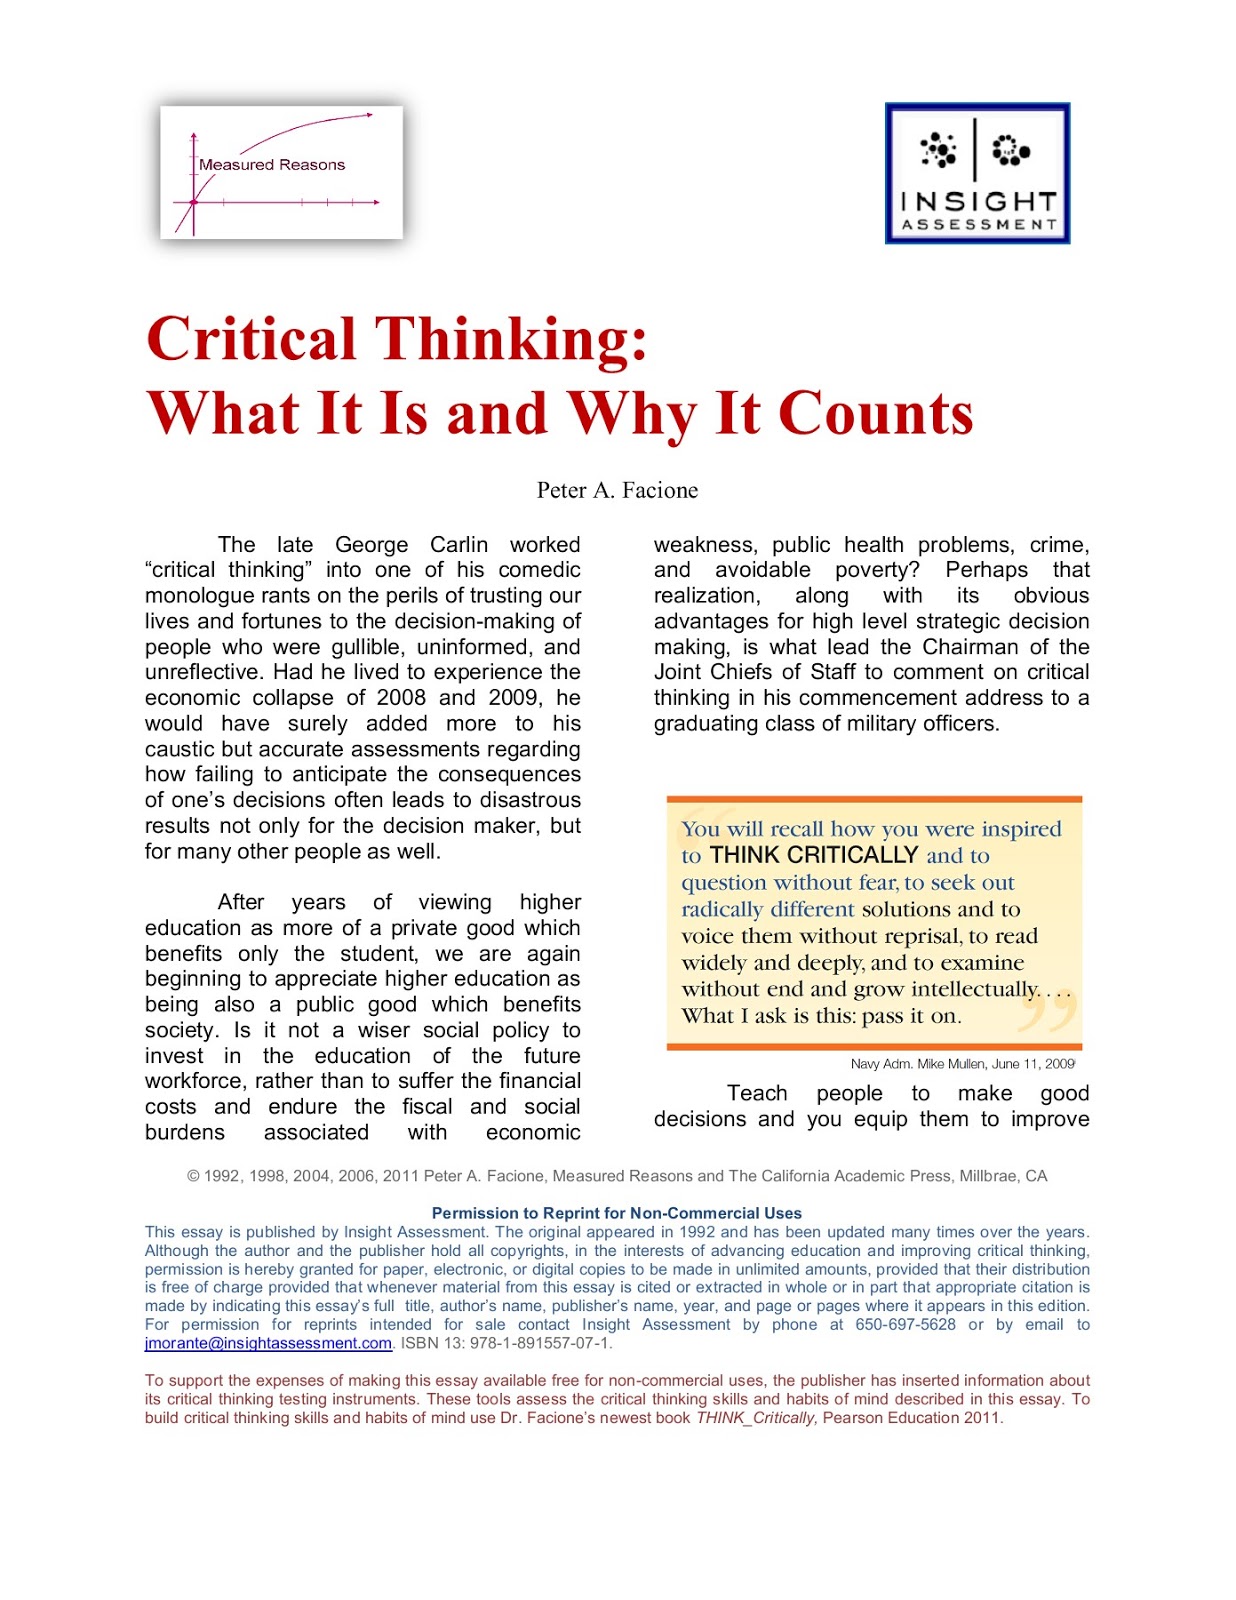 critical thinking essays examples